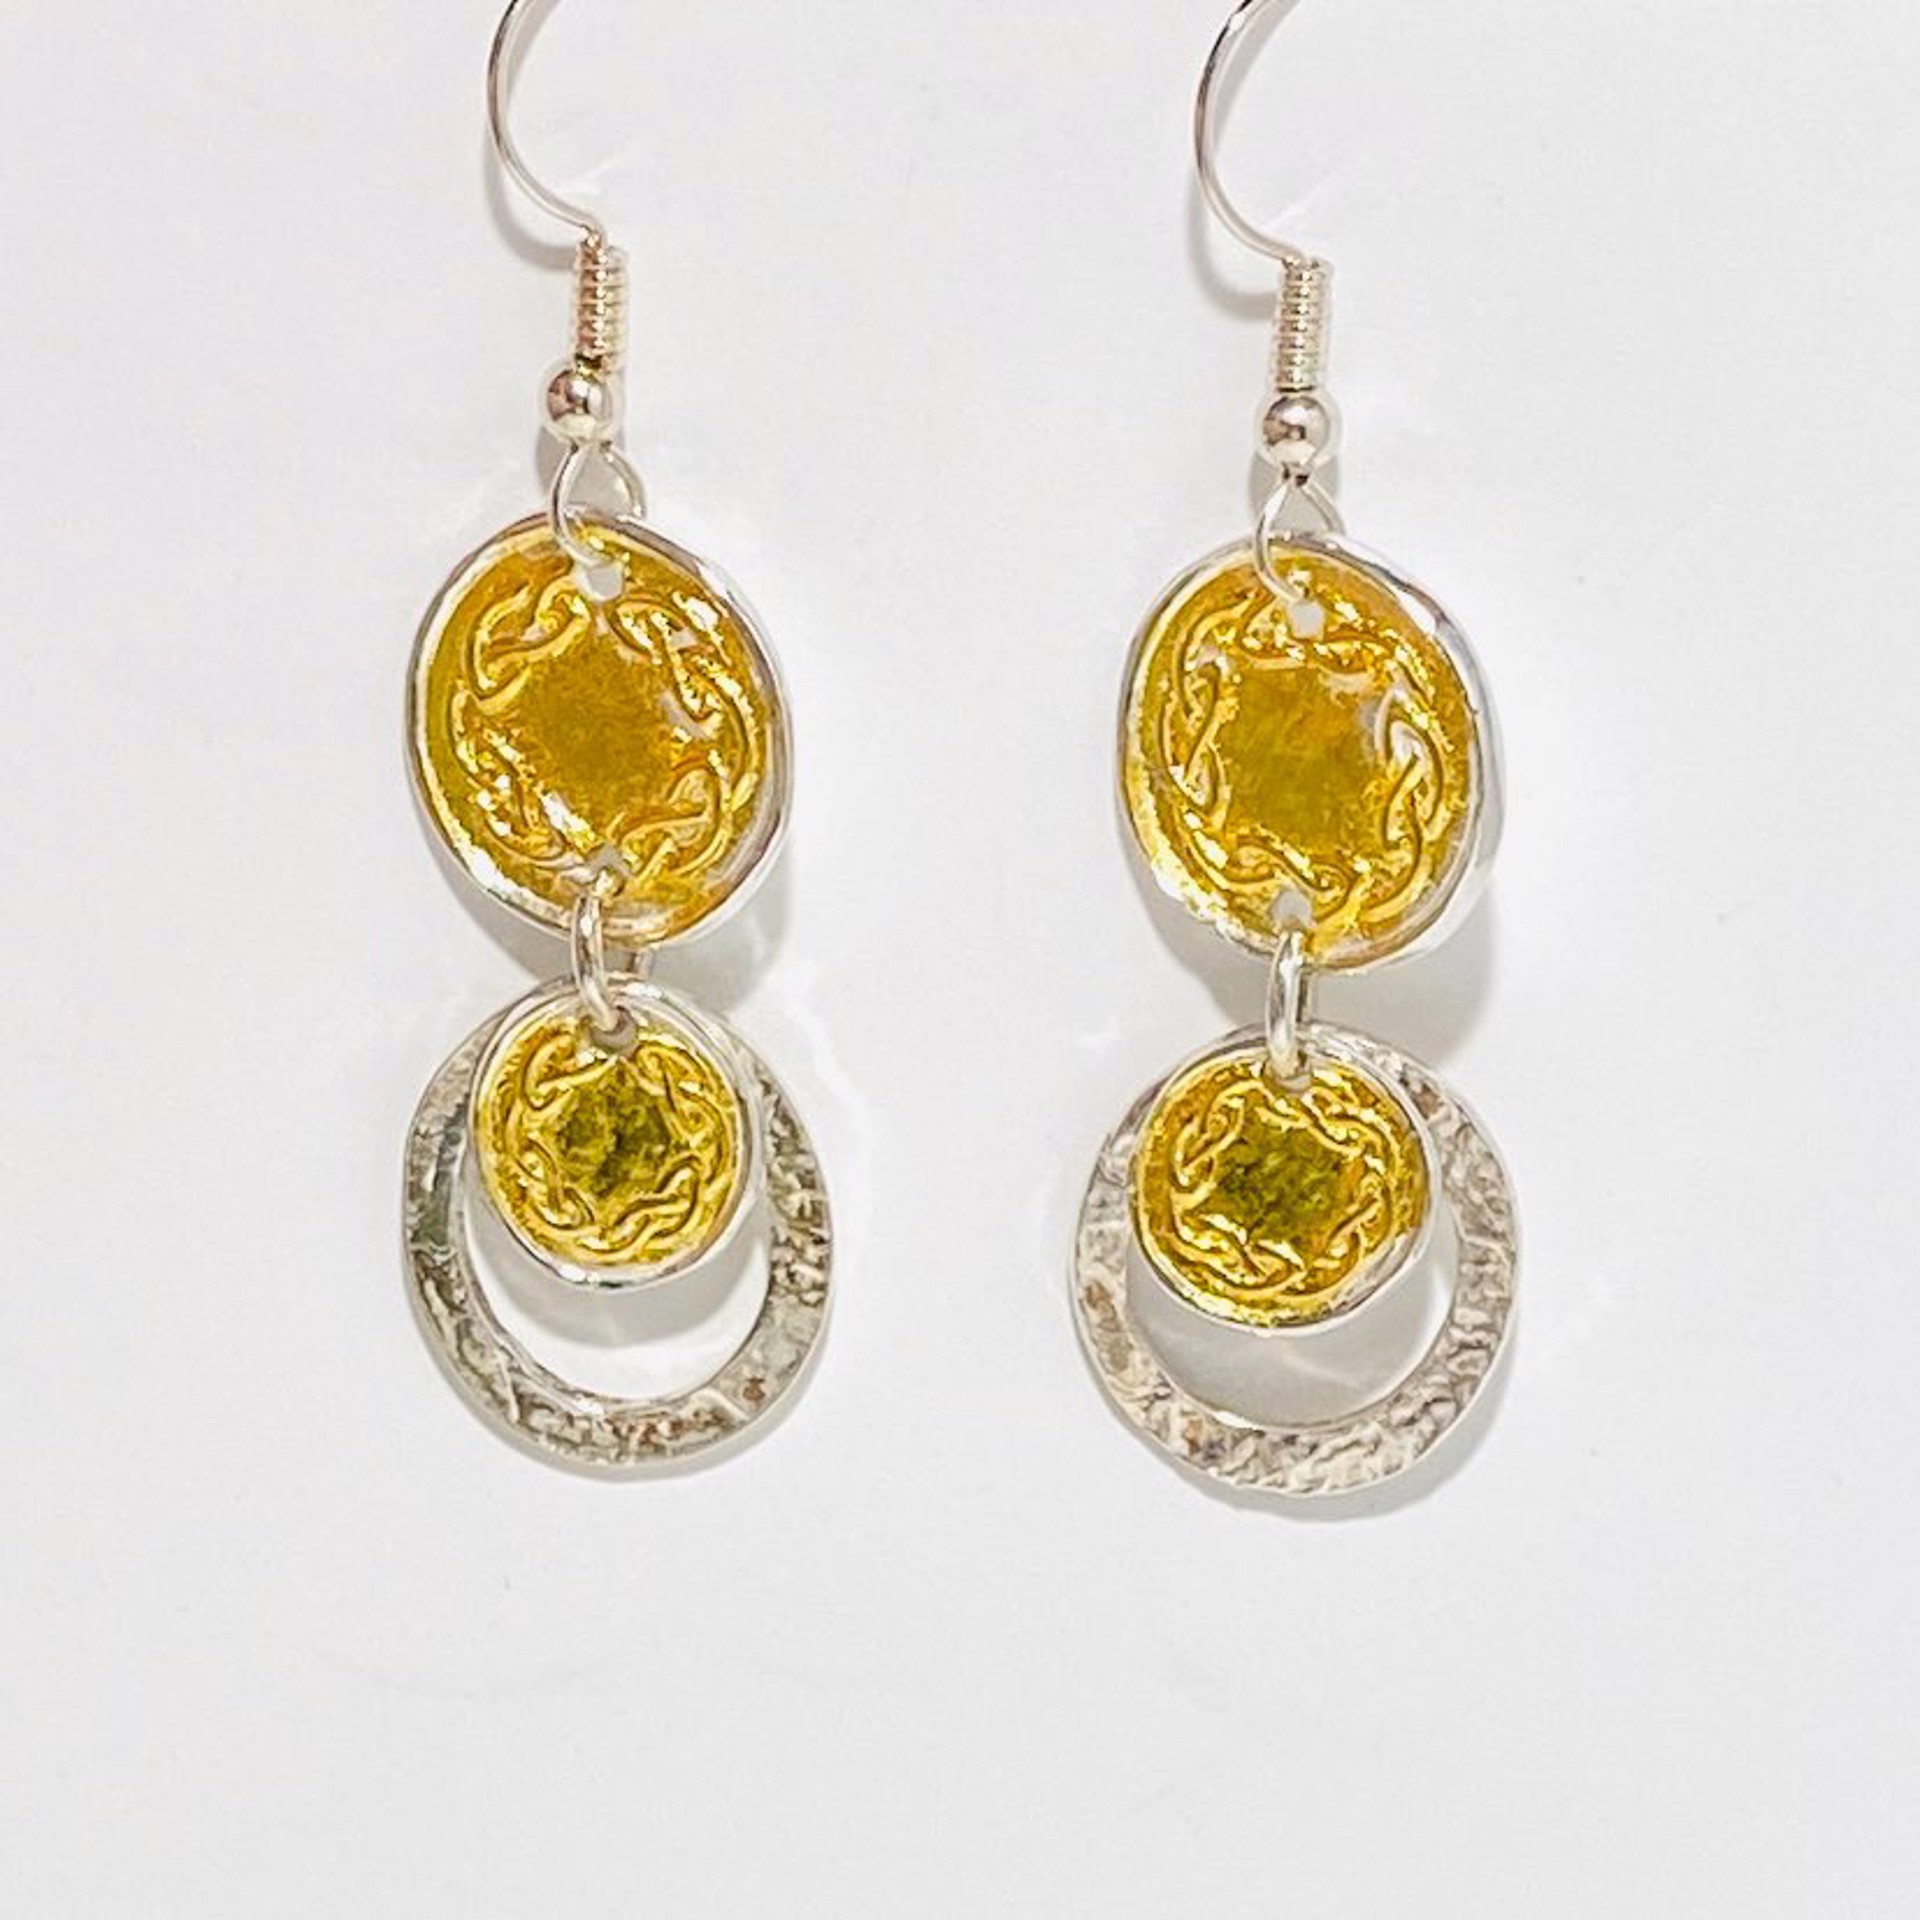 Keum-boo Fine Silver and Gold Three Circle Earrings by Karen Hakim